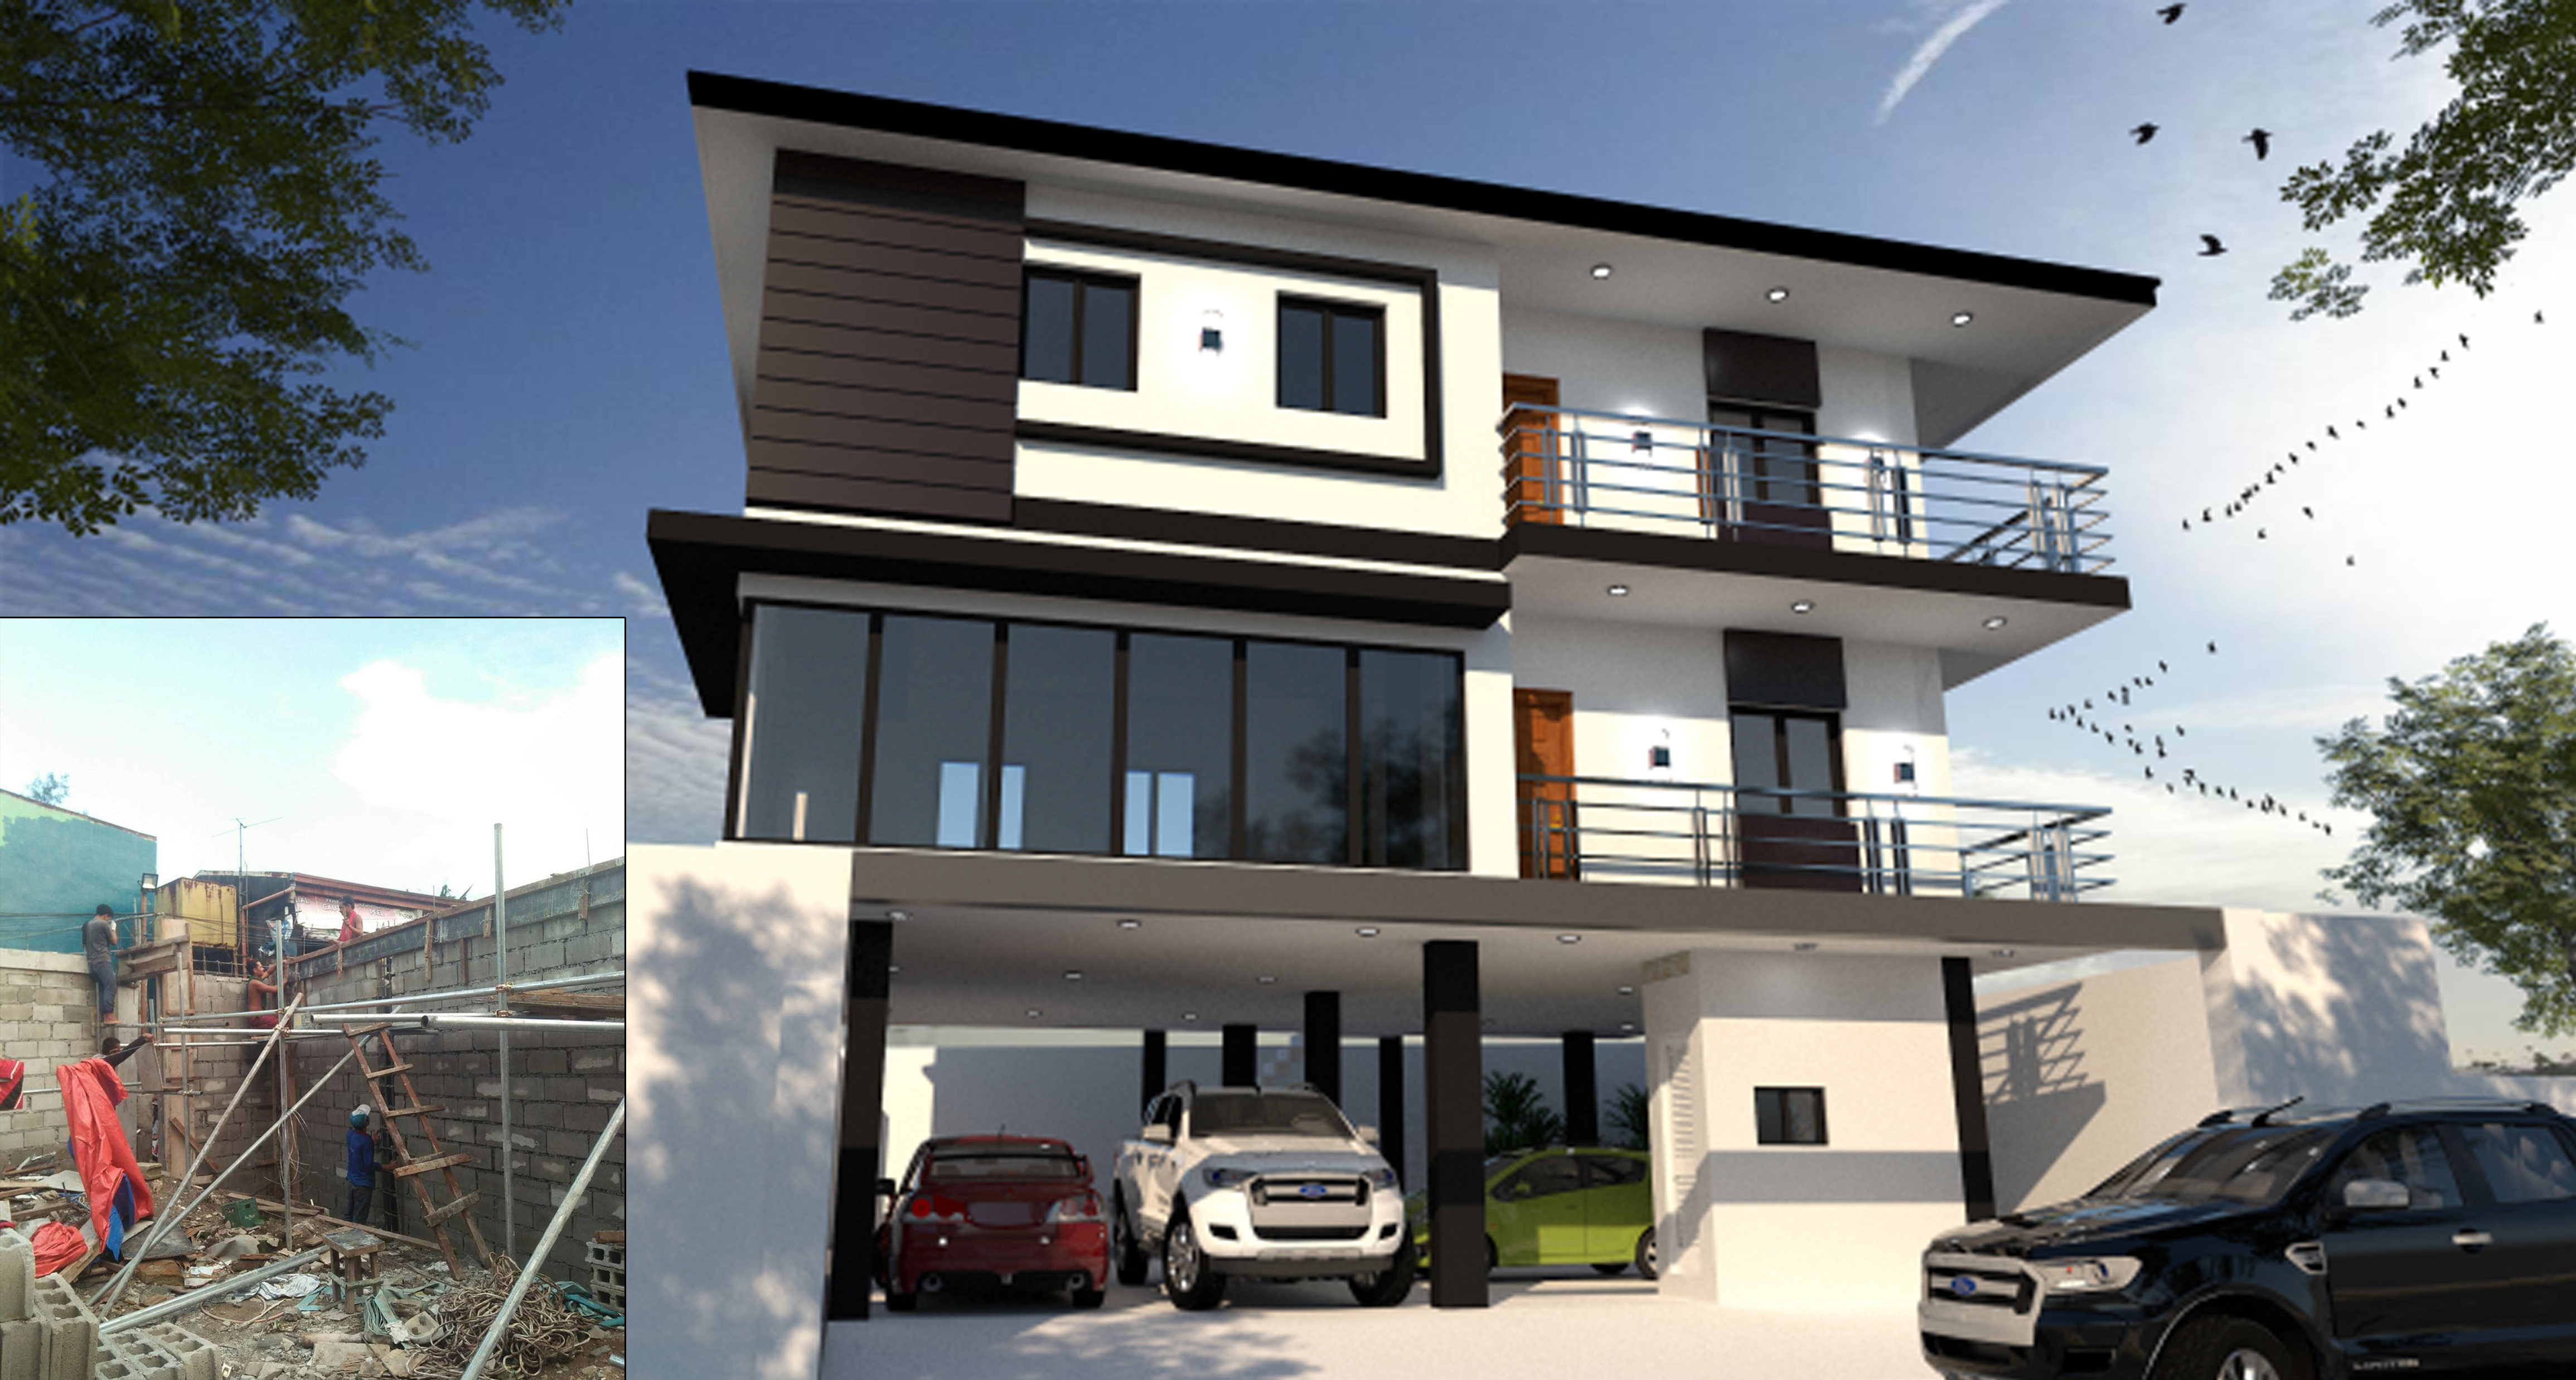 RESIDENTIAL DESIGN AND CONSTRUCTION PROJECTS